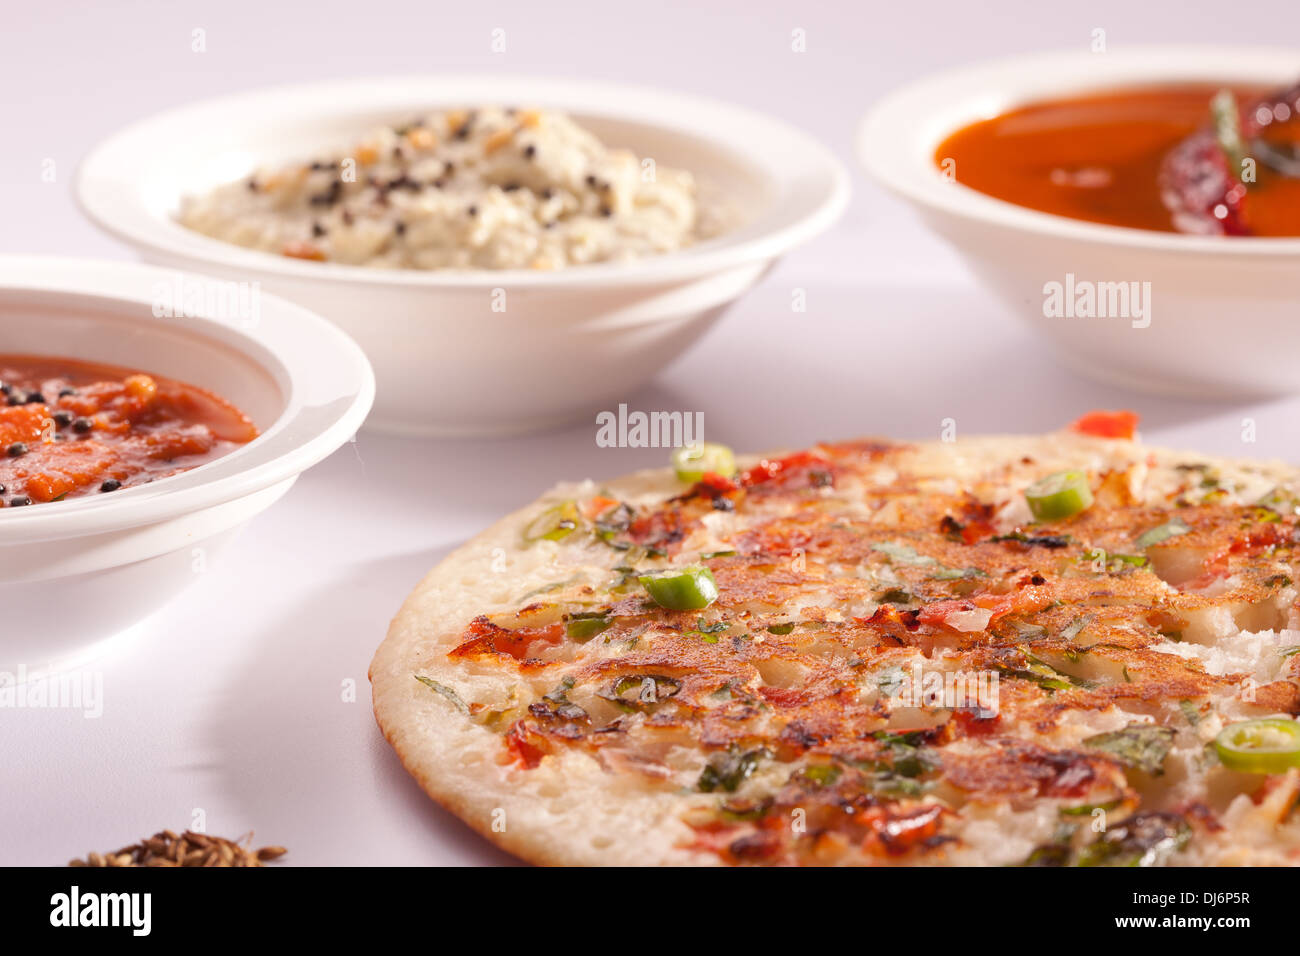 Onion Dosa - A spicy pancake from South India. Stock Photo